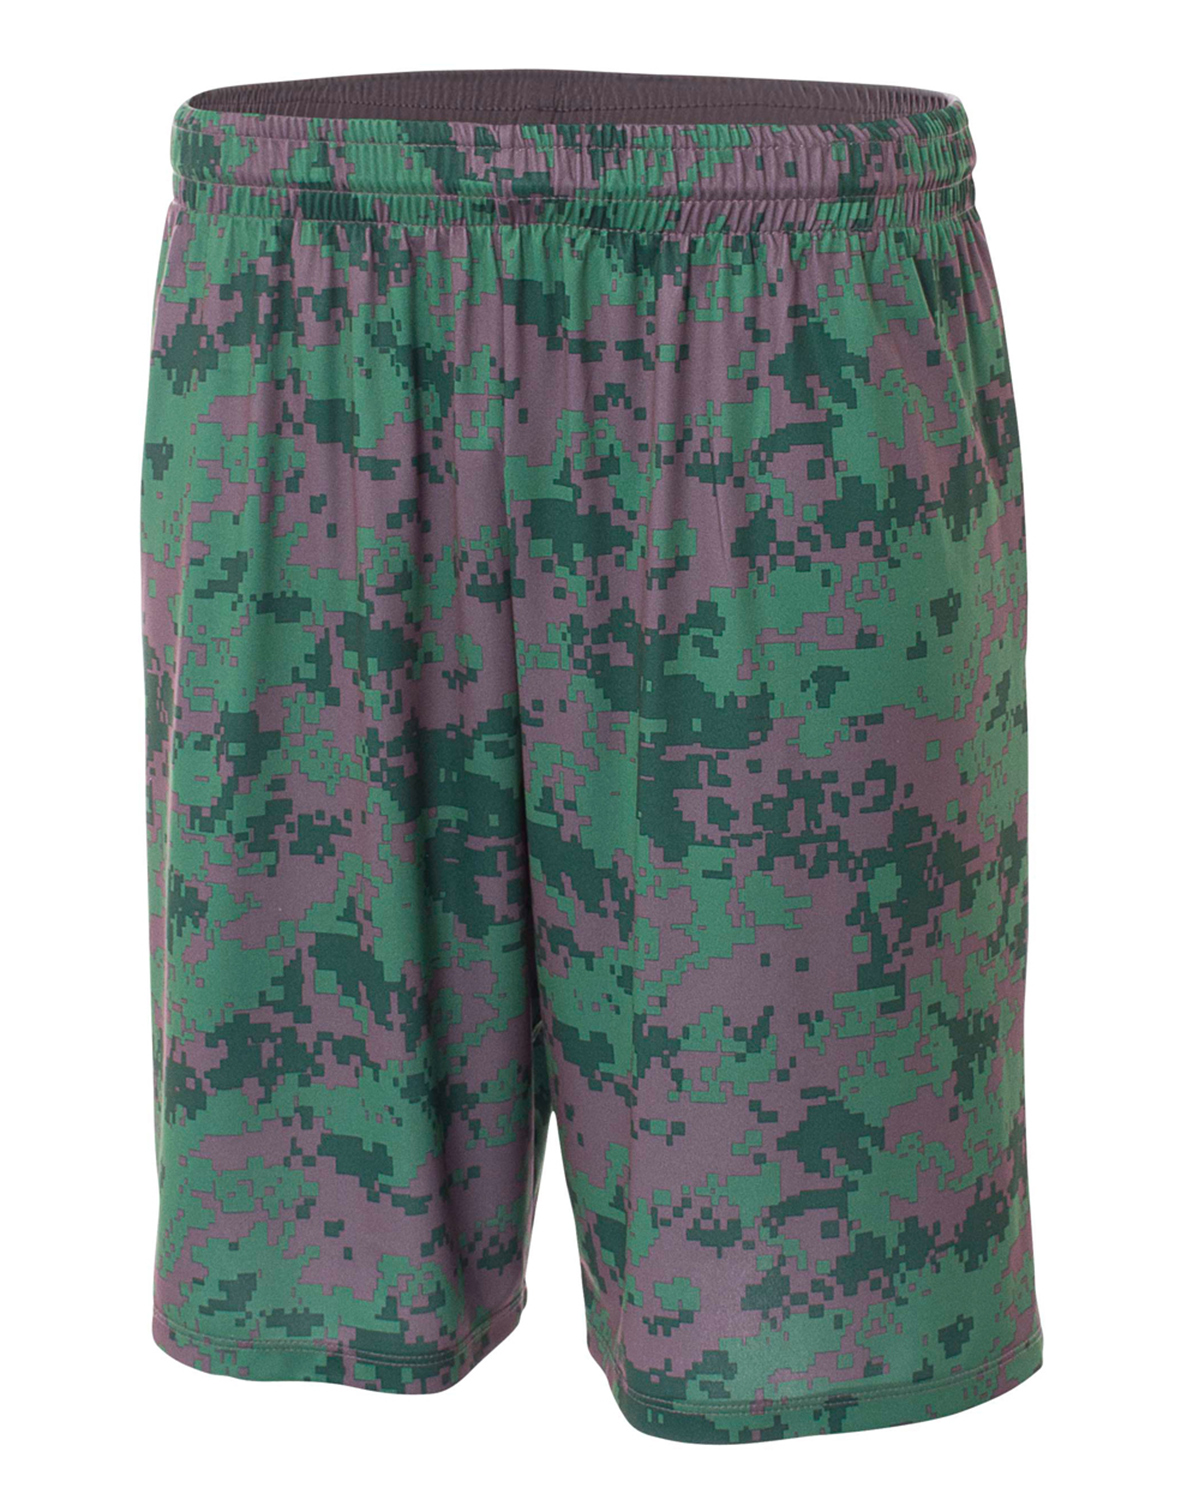 Youth 8 Inseam Printed Camo Performance Shorts A4 NB5322